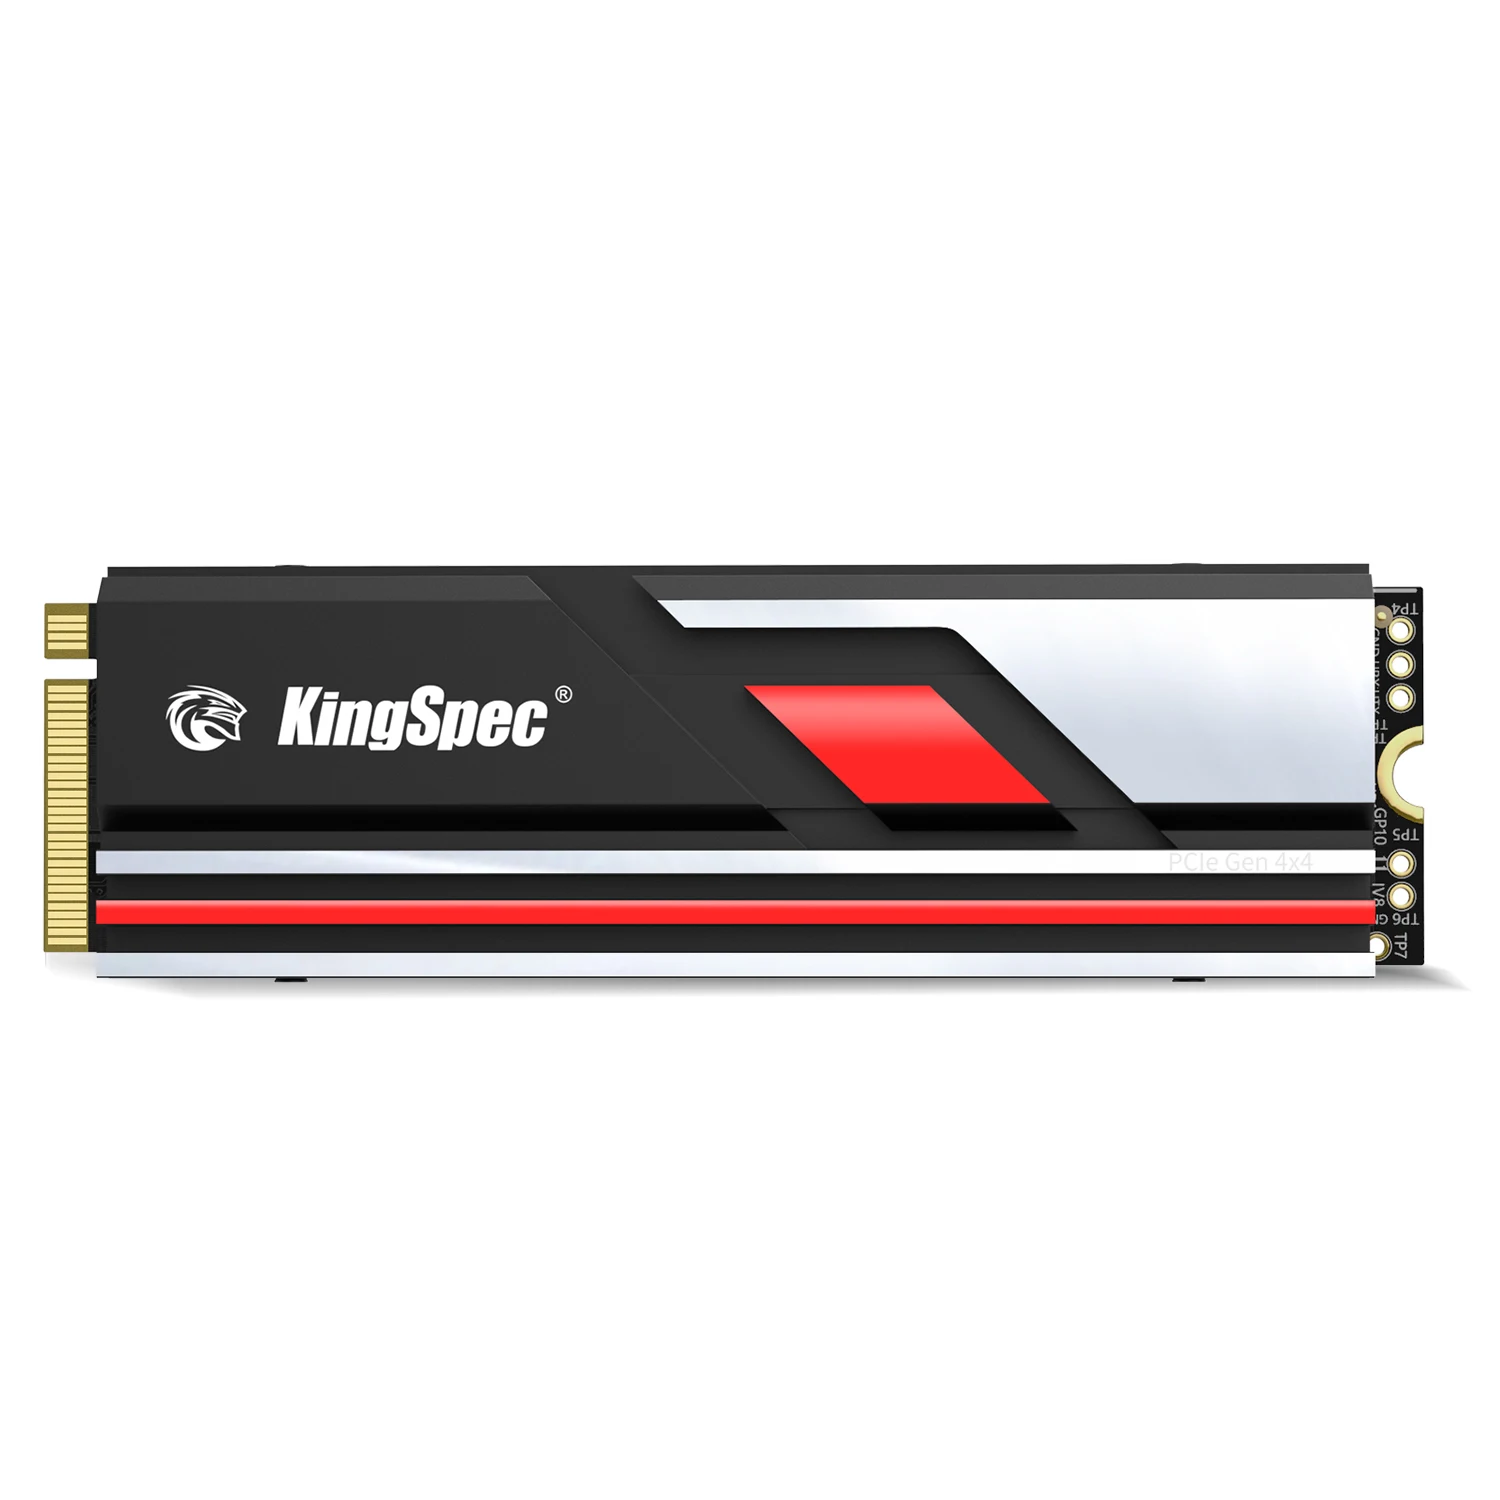 

KingSpec High Performance 512GB 1TB 2TB 4TB Gaming ssd heat sink nvme m.2 pcie 4x4 nvme pcie 4.0 For PS5